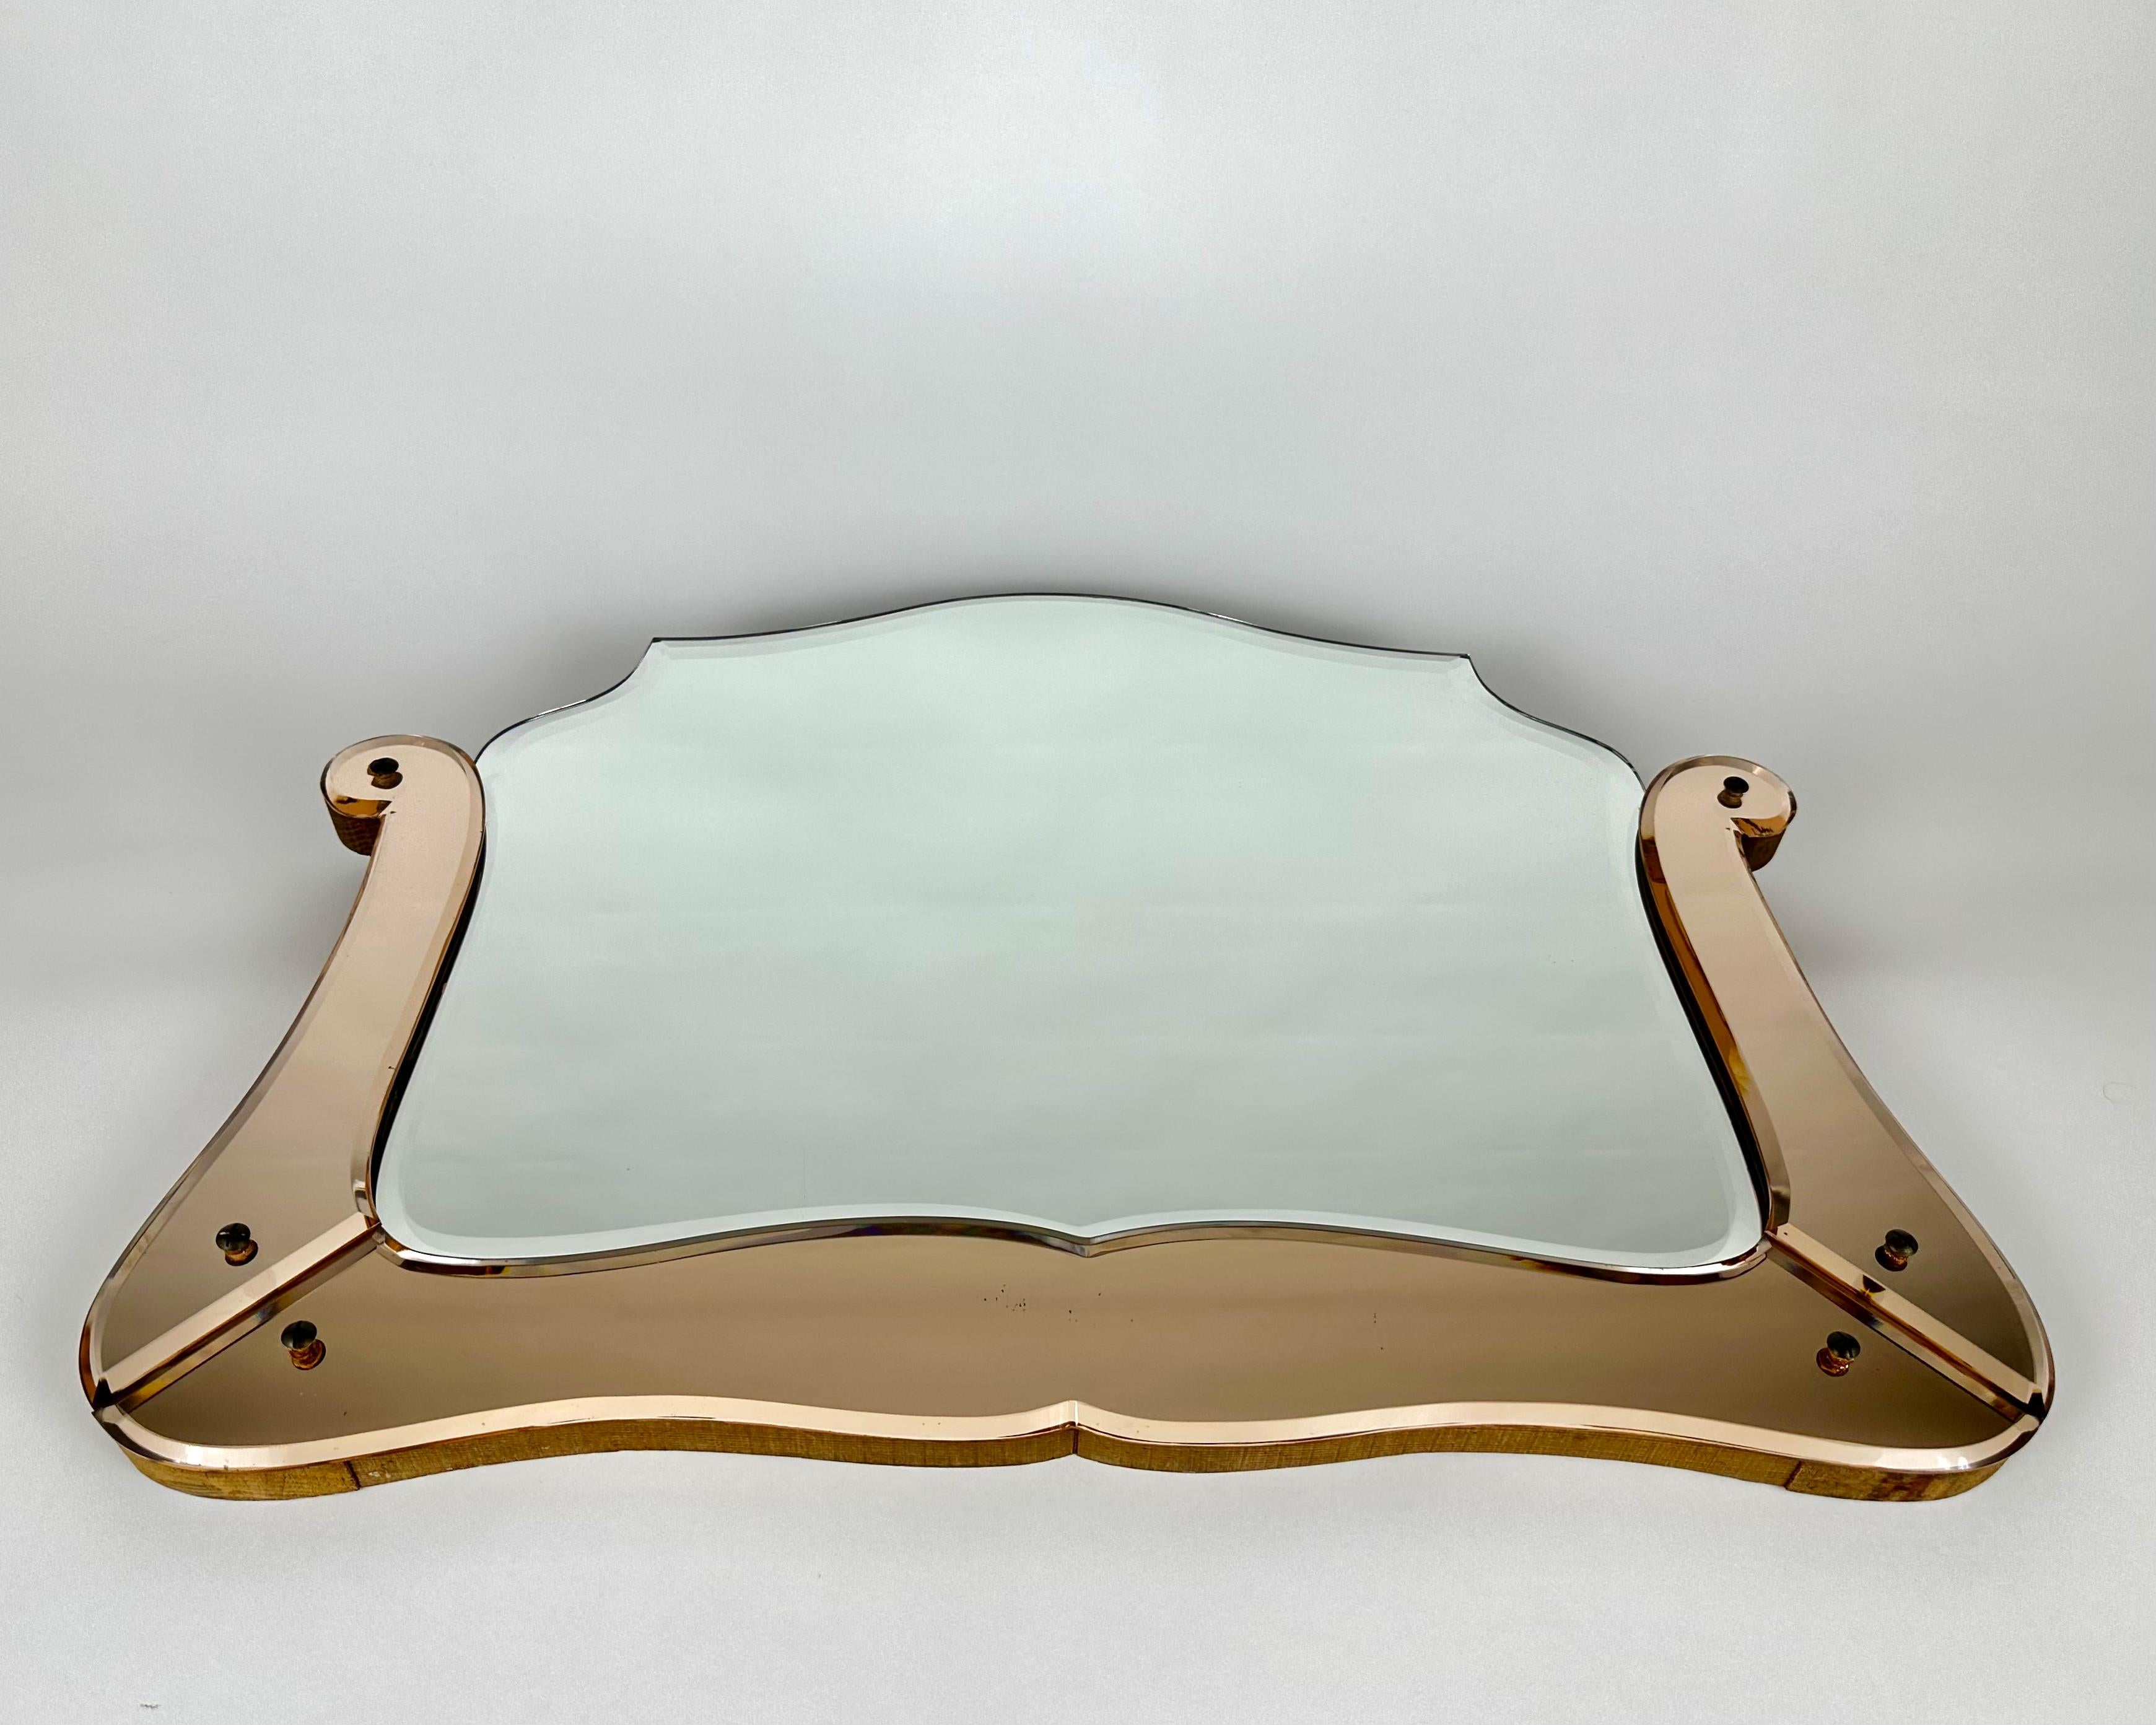 Beveled glass Vanity Dresser Hallway Mirror.

This extraordinary exquisite mirror was made in the 20th Century.

With its clean geometric form and impeccable construction, this mirror would be a winning addition to any style of interior from classic